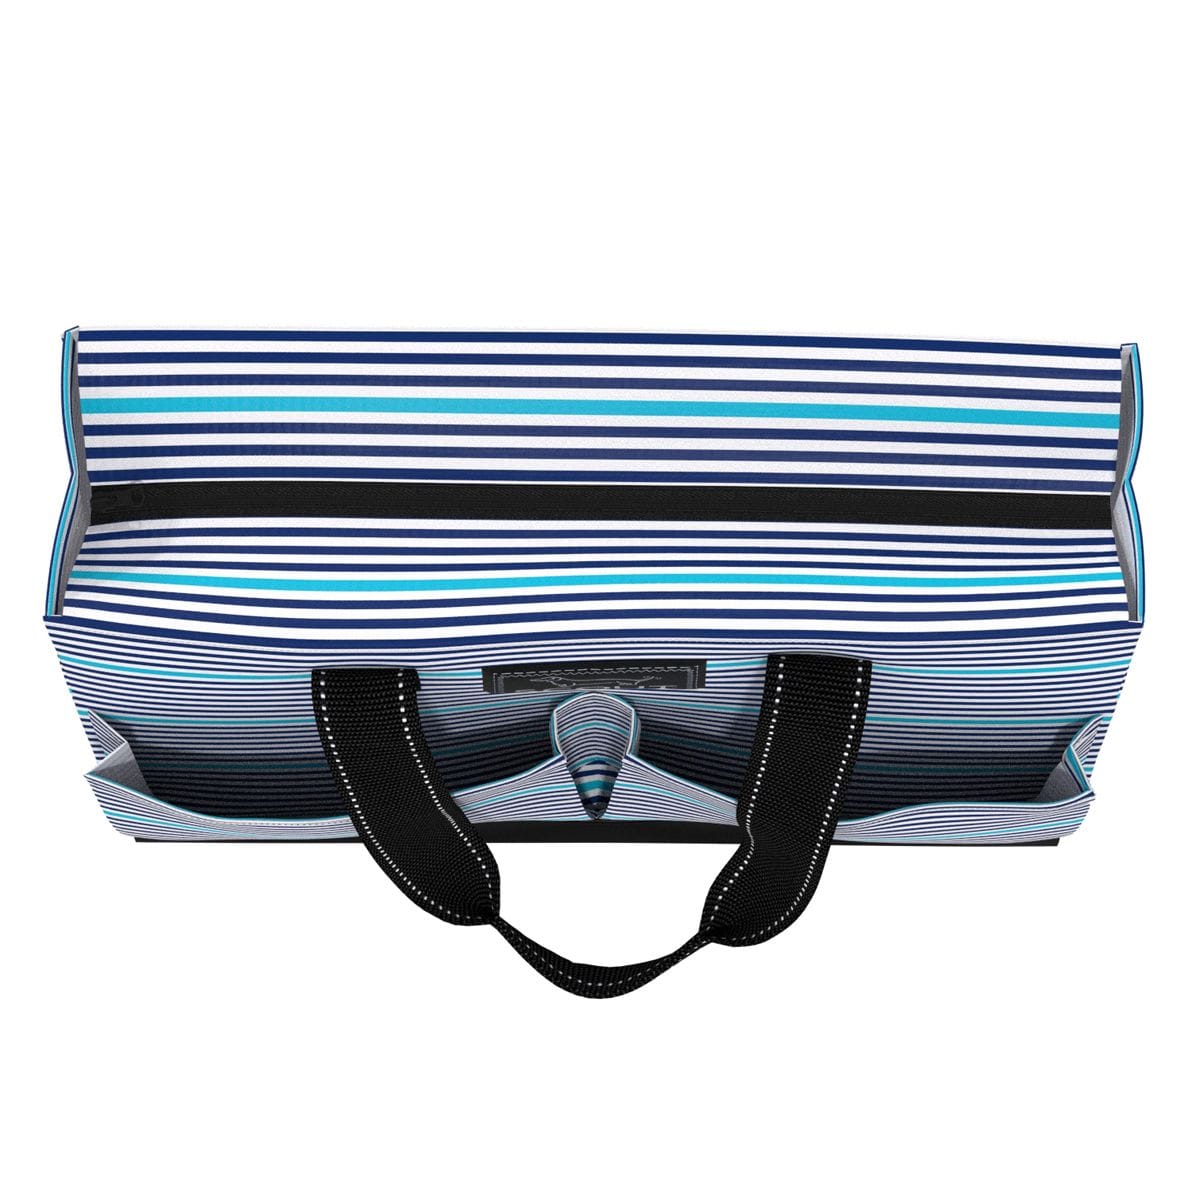 Scout Scout Sea Island Stripe Uptown Girl Pocket Tote Bag - Little Miss Muffin Children & Home